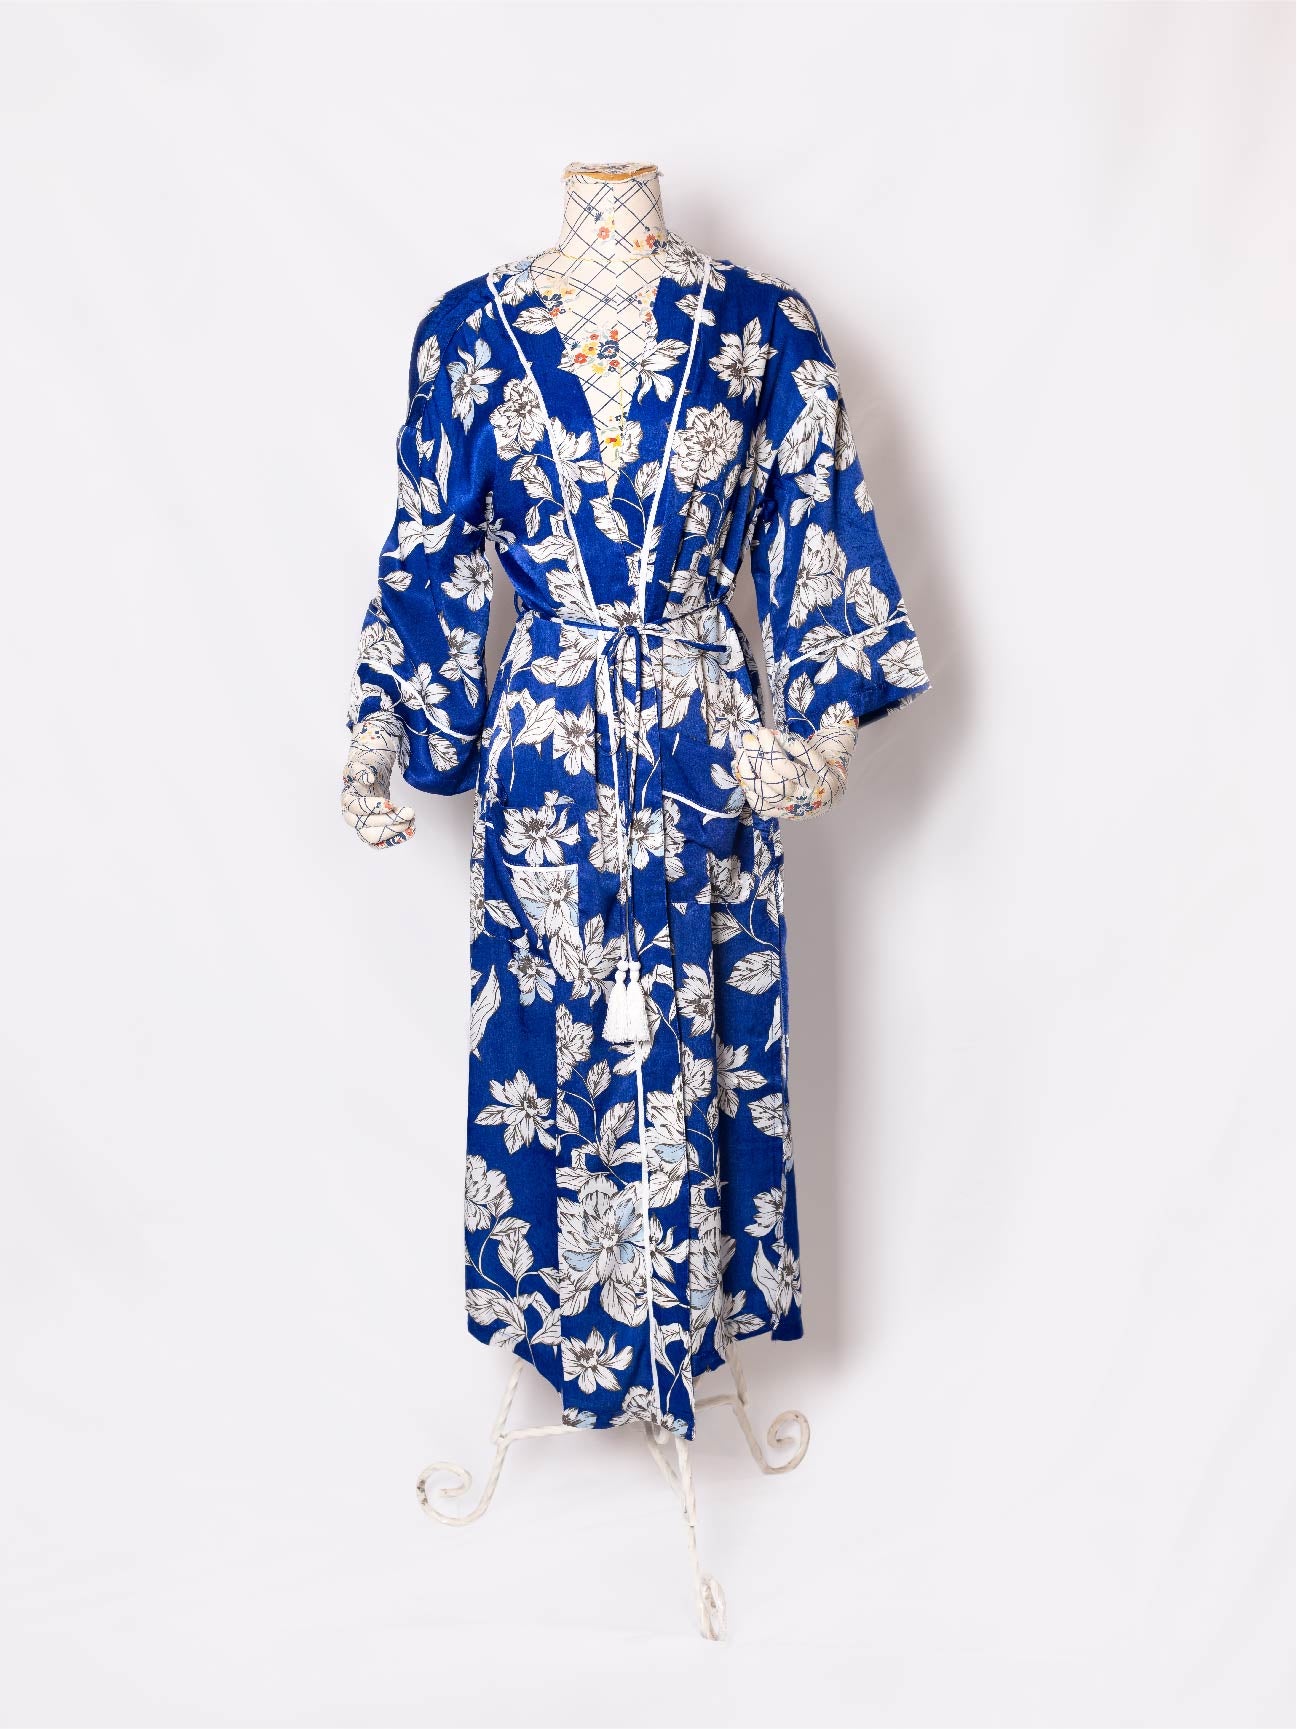 Floral Dressing Gown